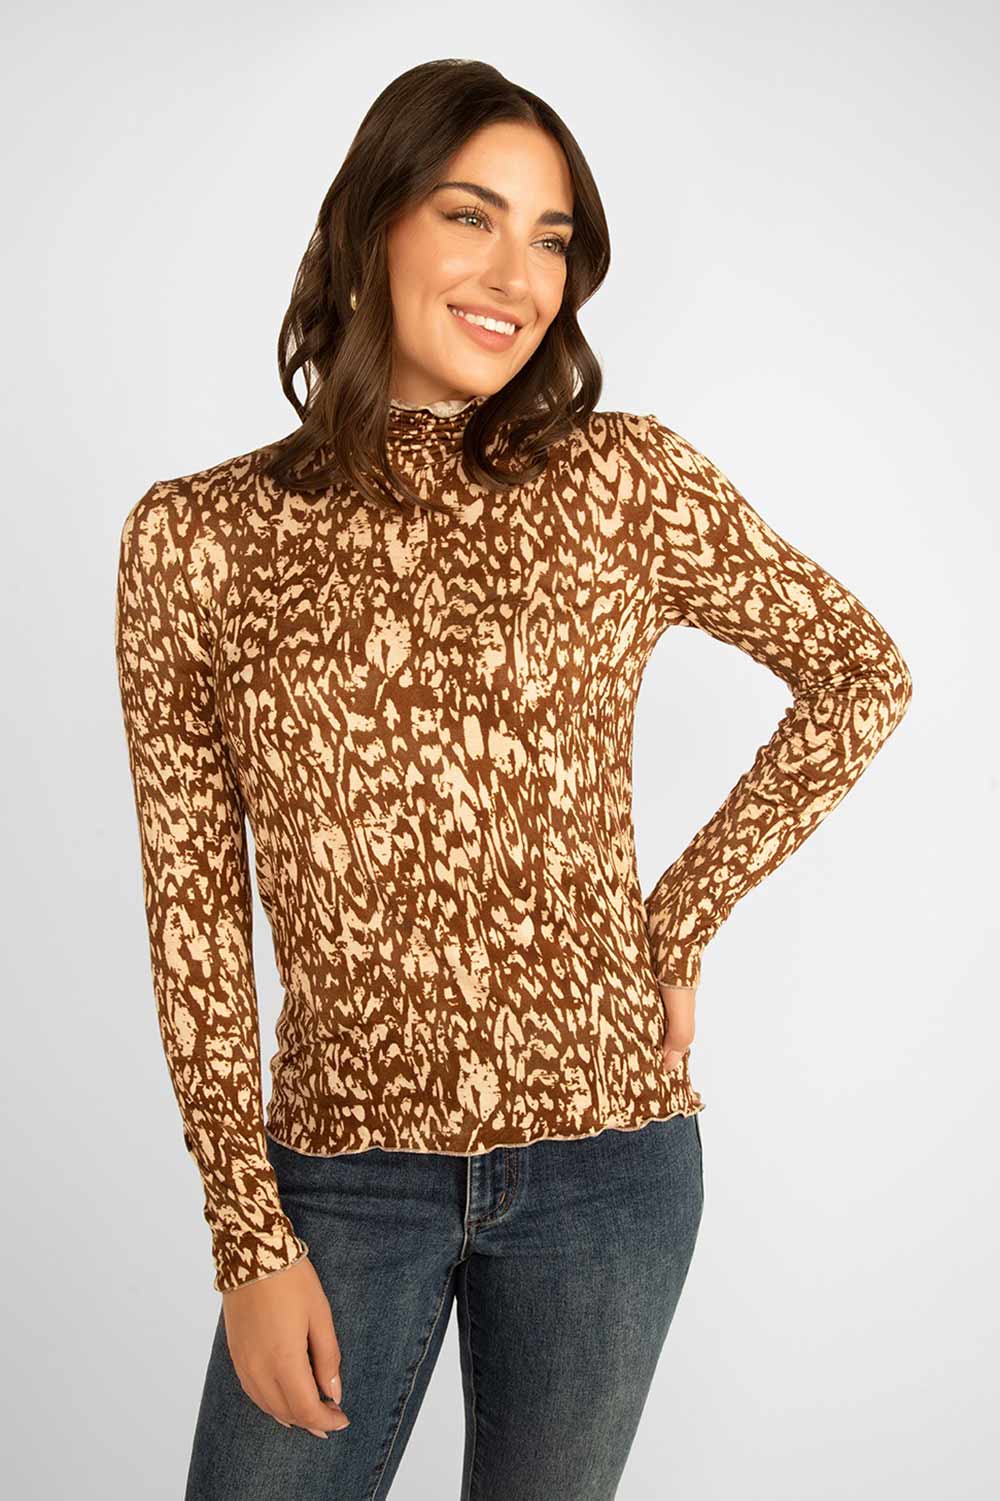 Women's Clothing ELISSIA (MY10079-1C) Printed Turtleneck Top in CHOCOLATE